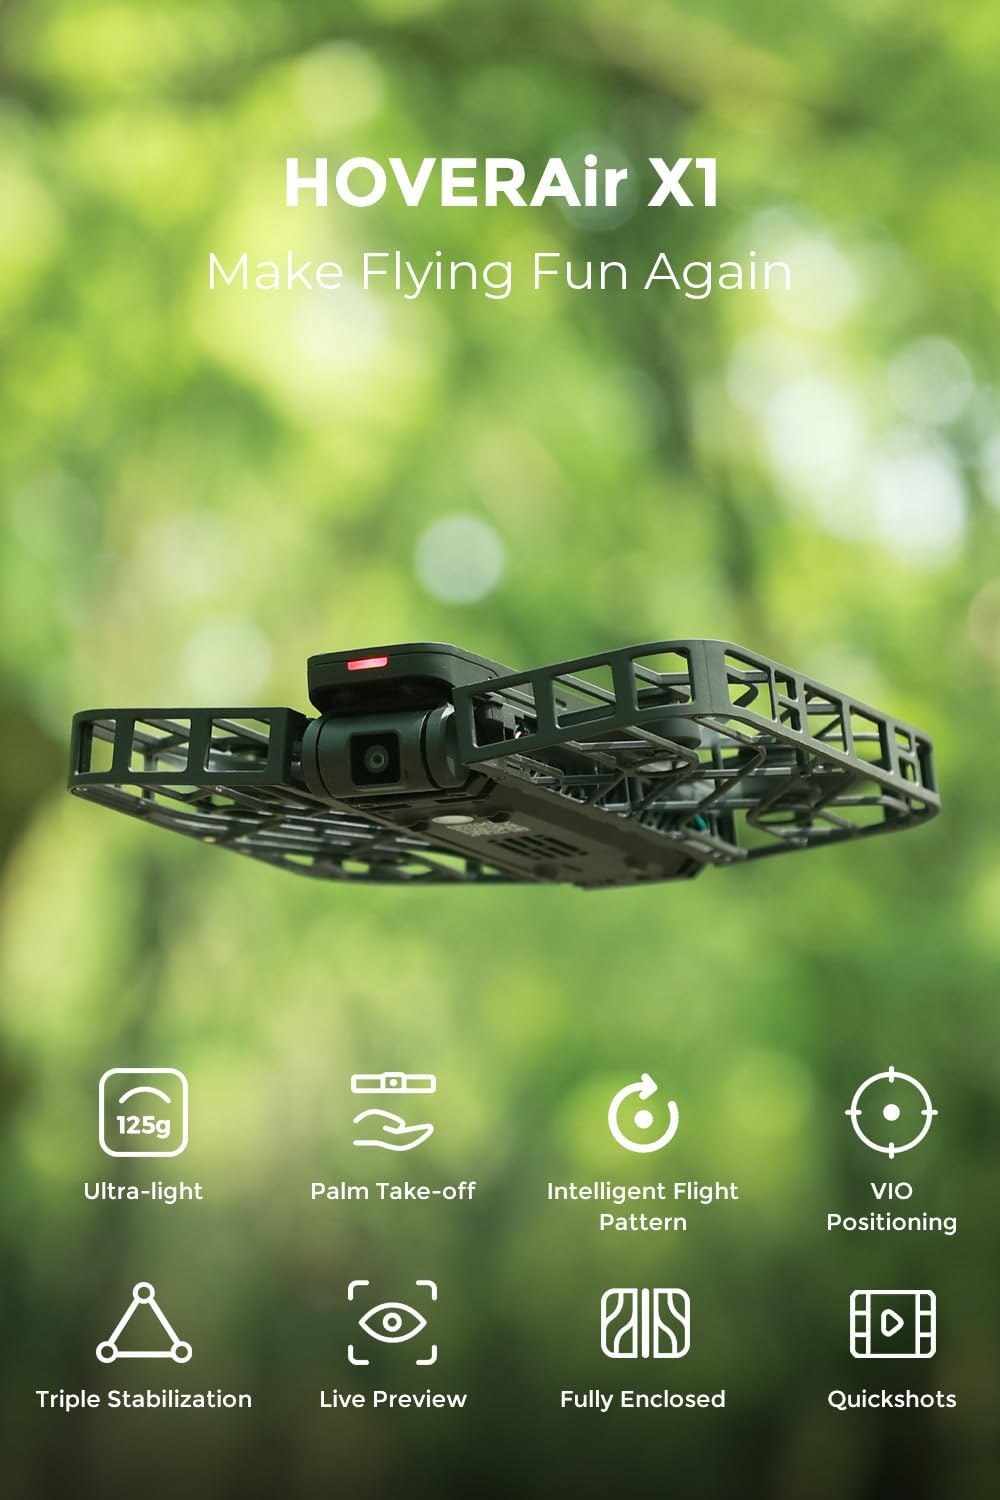 The image appears to be an advertisement for a drone named HoverAir X1.